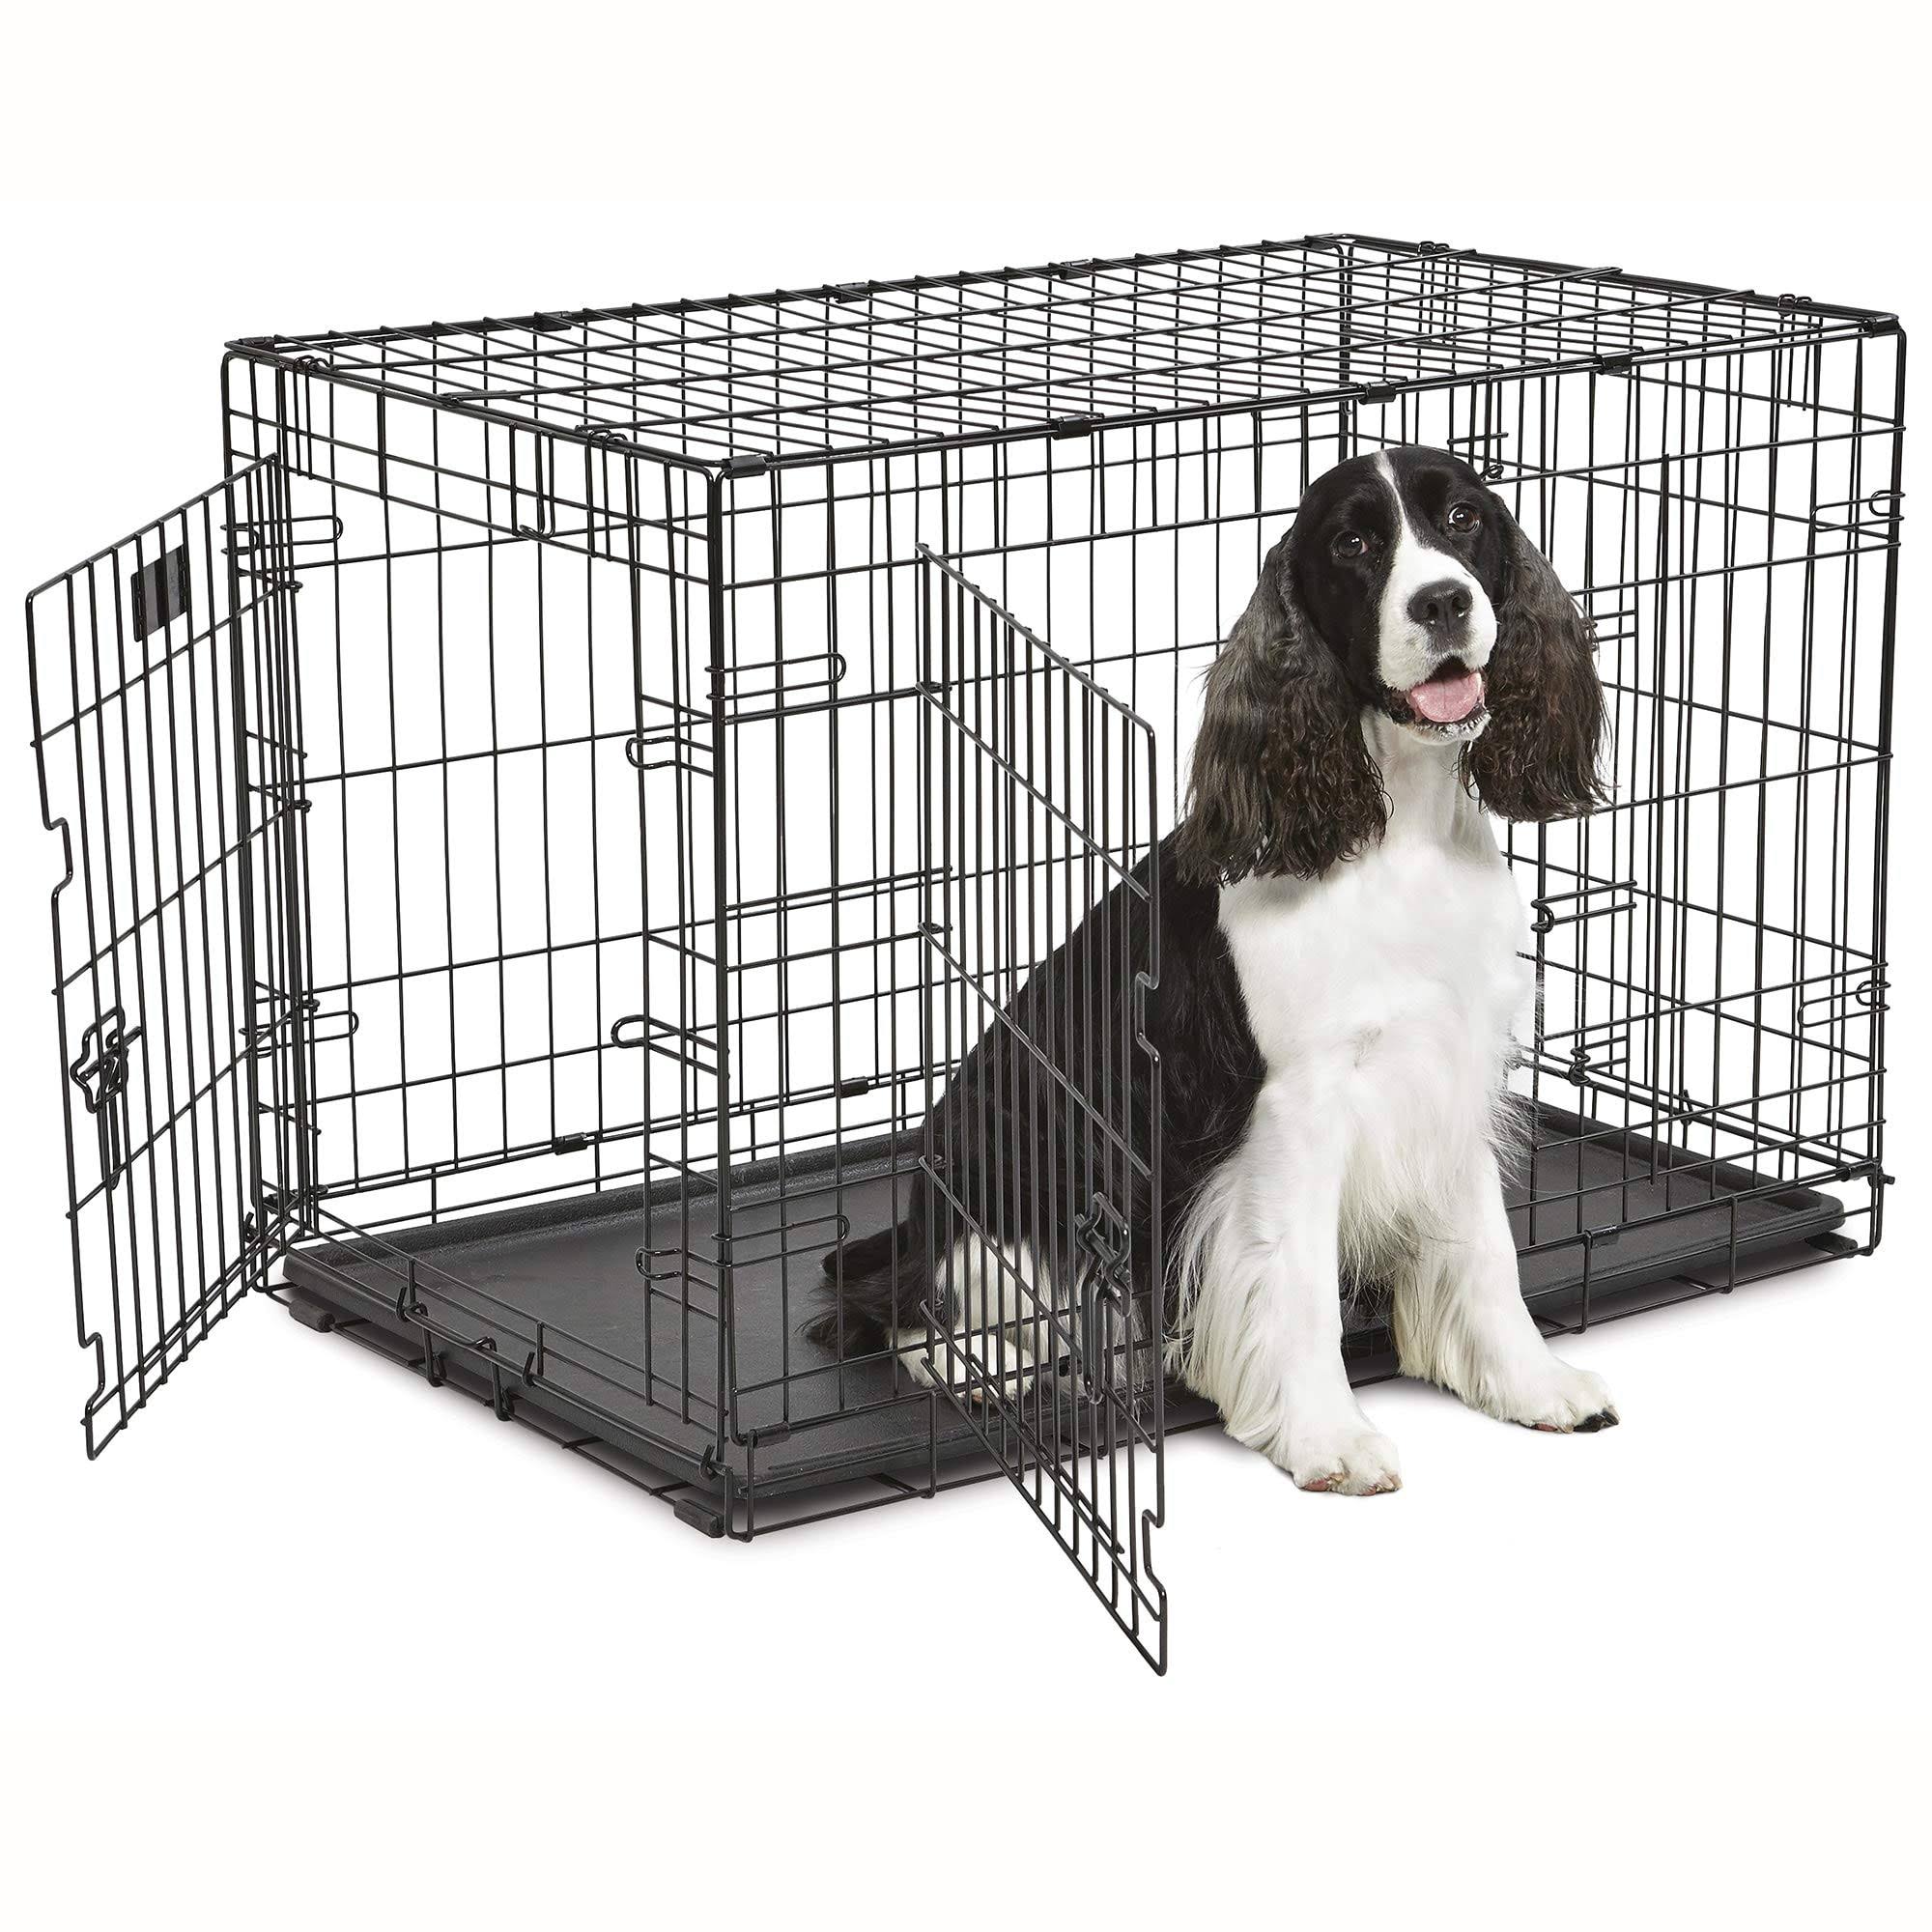 Midwest Products Co. 36" Contour Dbl Door Dog Crate